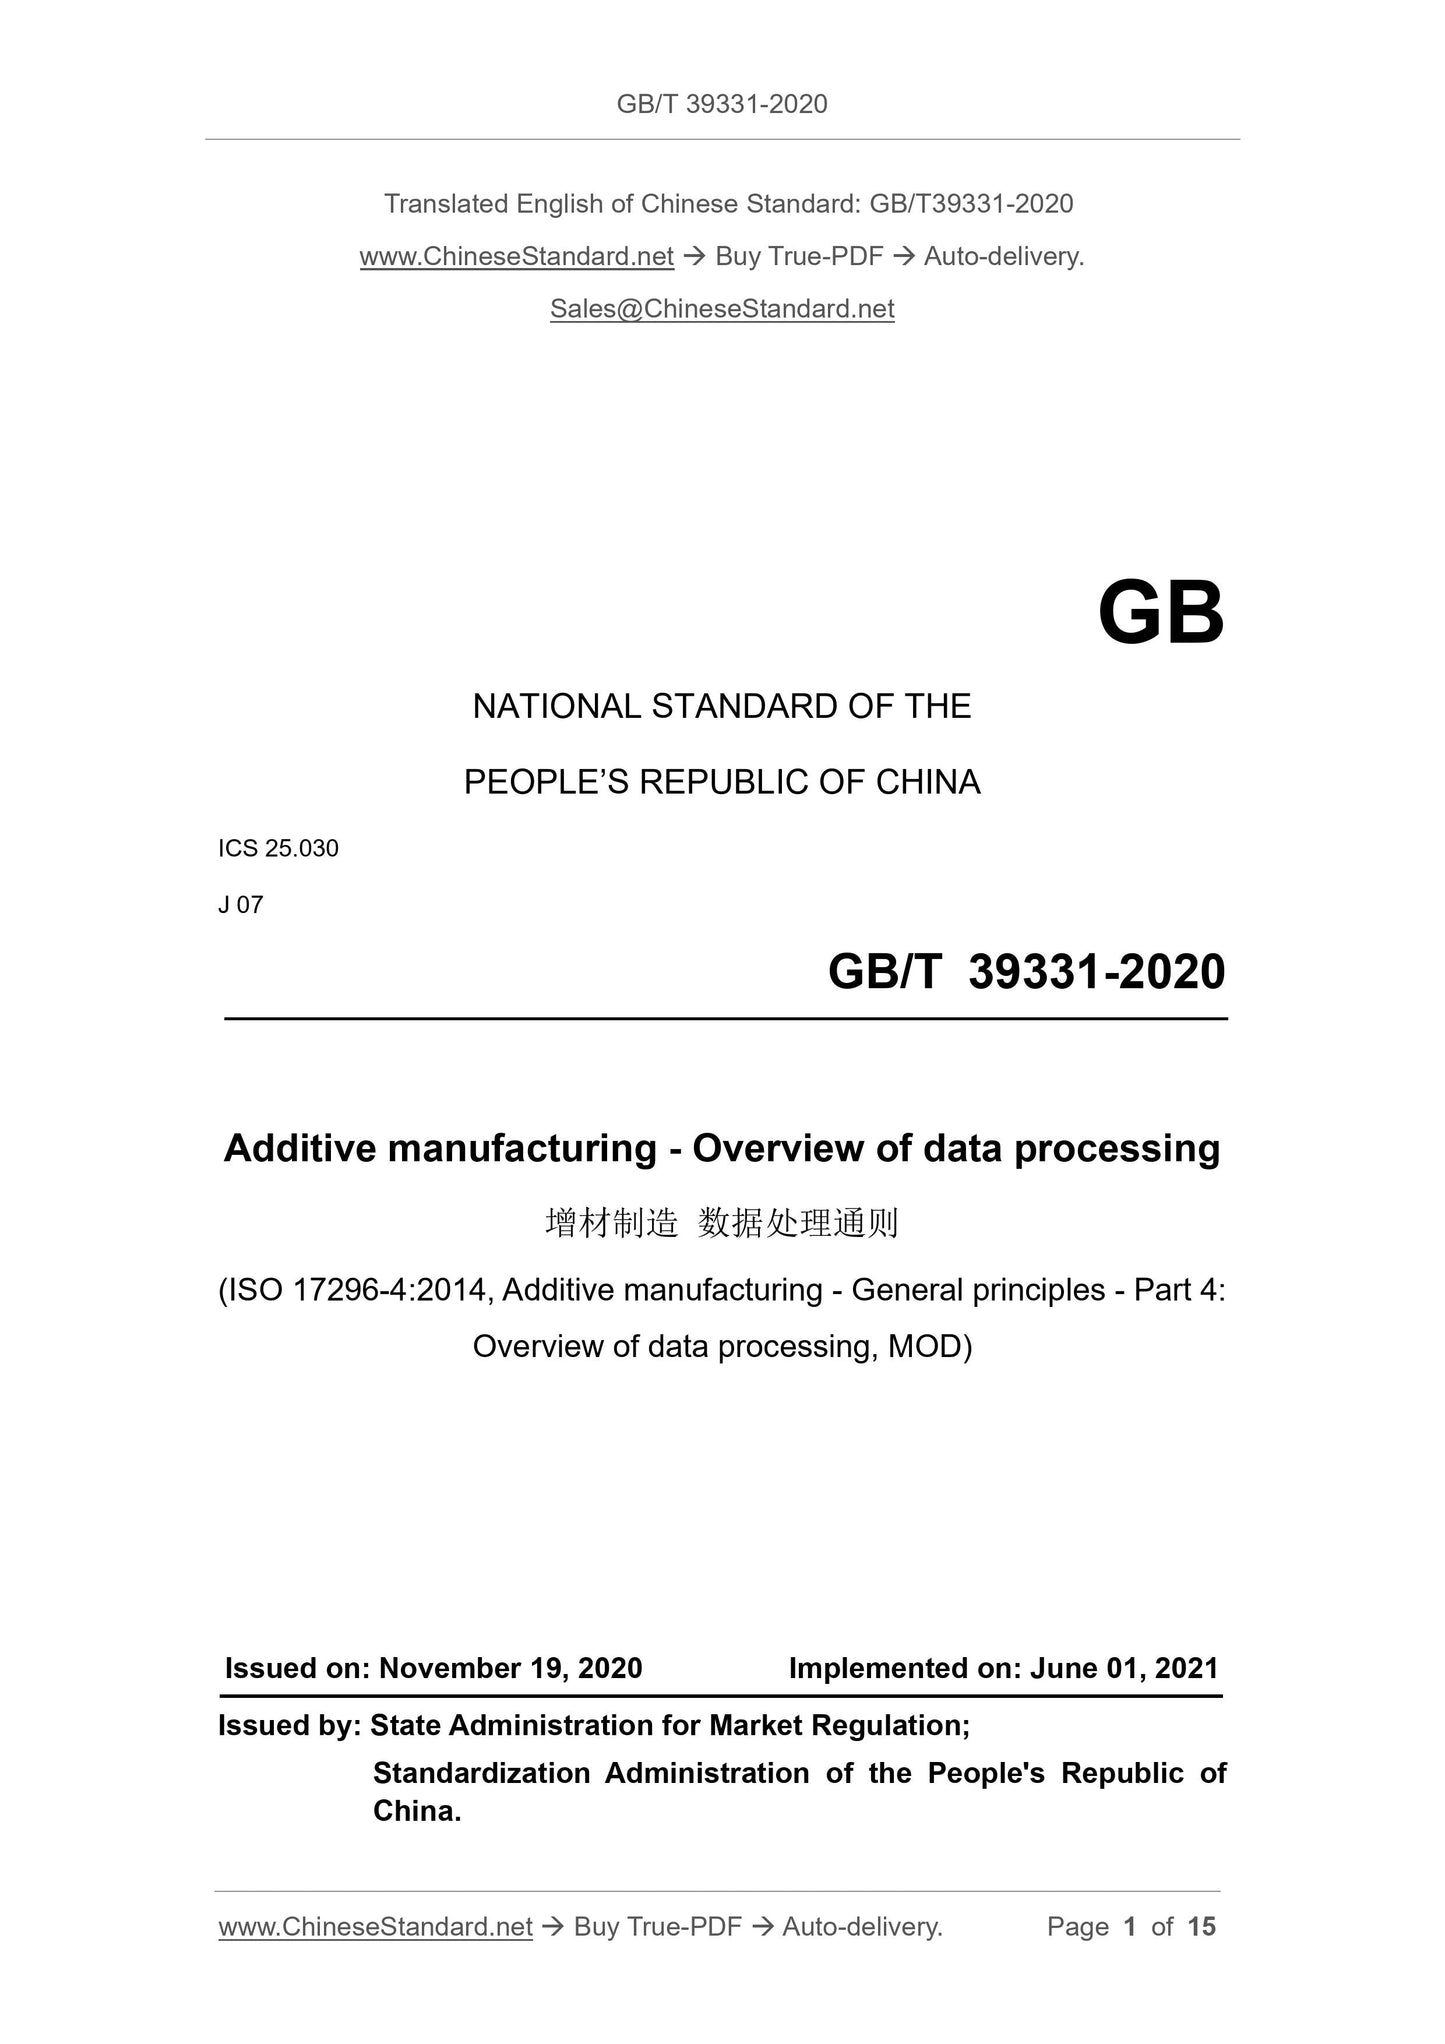 GB/T 39331-2020 Page 1